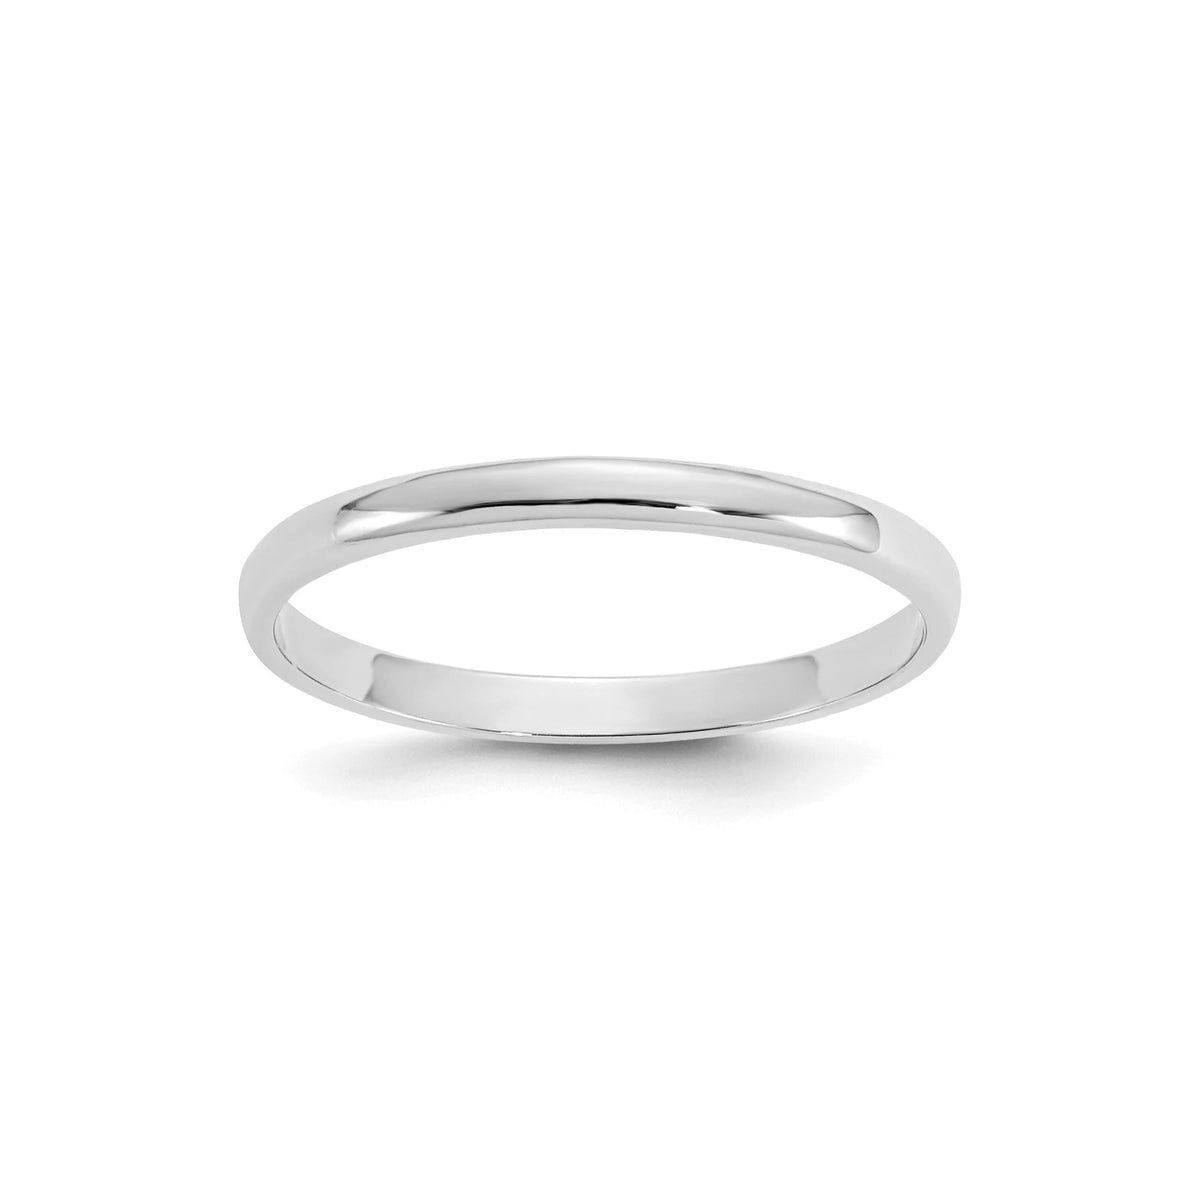 14k White Gold Baby Ring / Band Size 3 Toddler Size 1mm Band - Gift Box Included